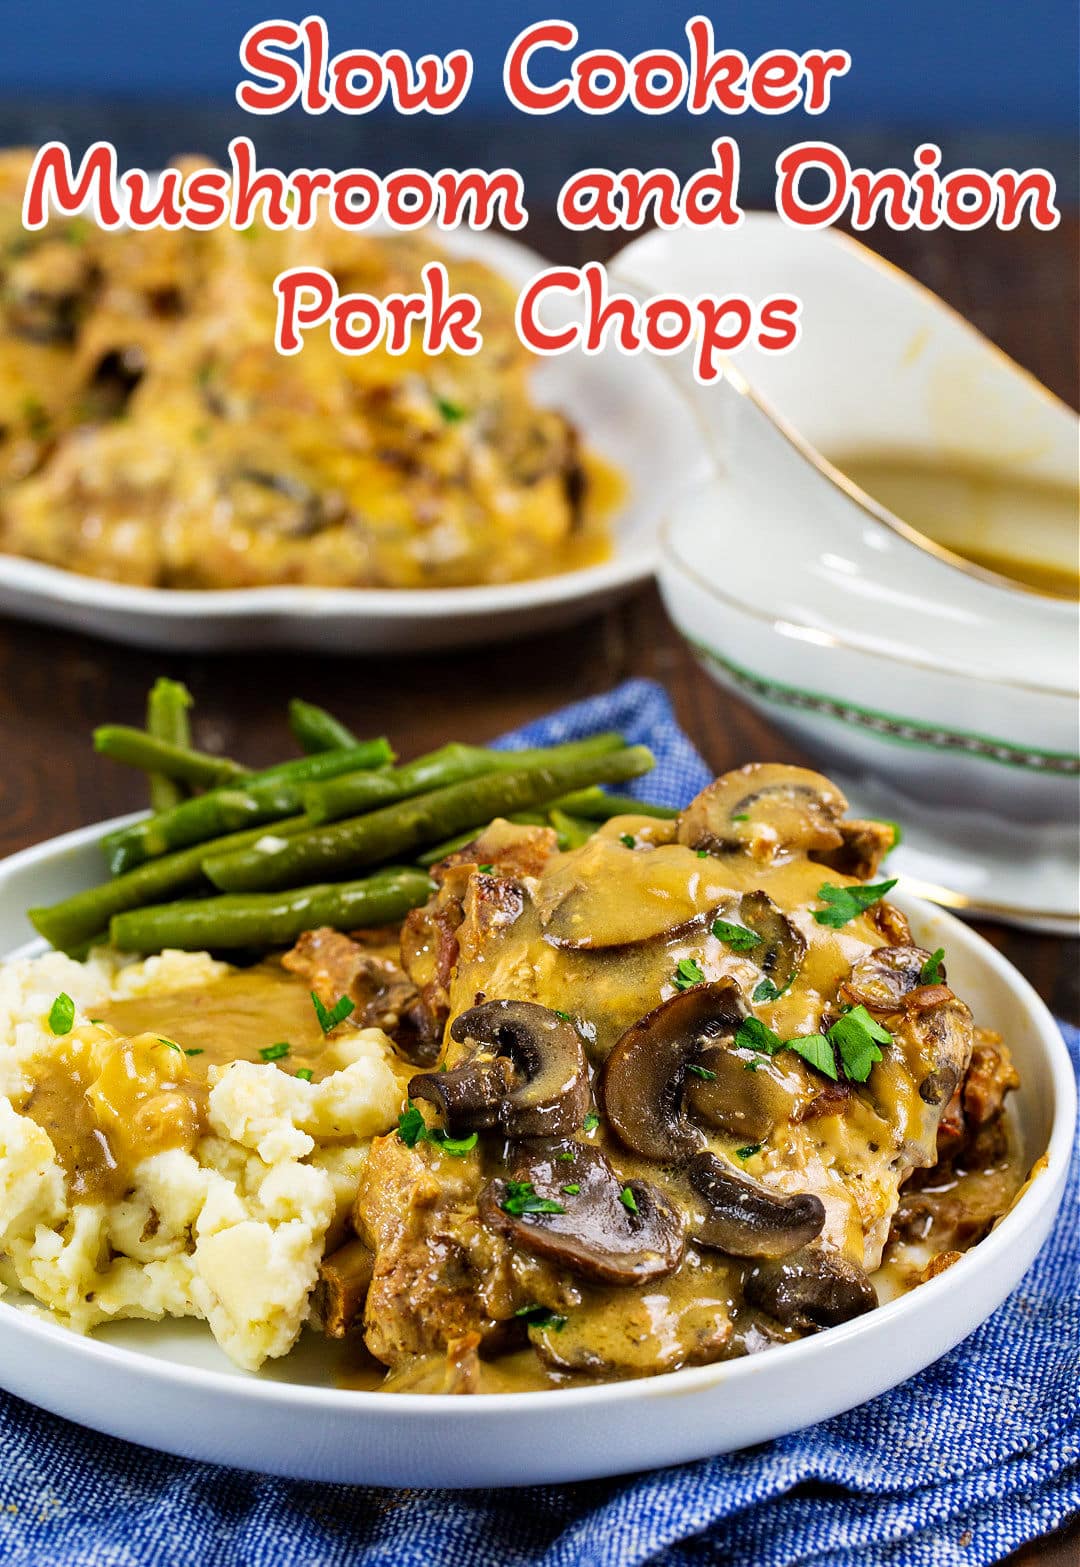 Slow Cooker Mushroom and Onion Pork Chops dished up on plate with mashed potatoes and green beans.